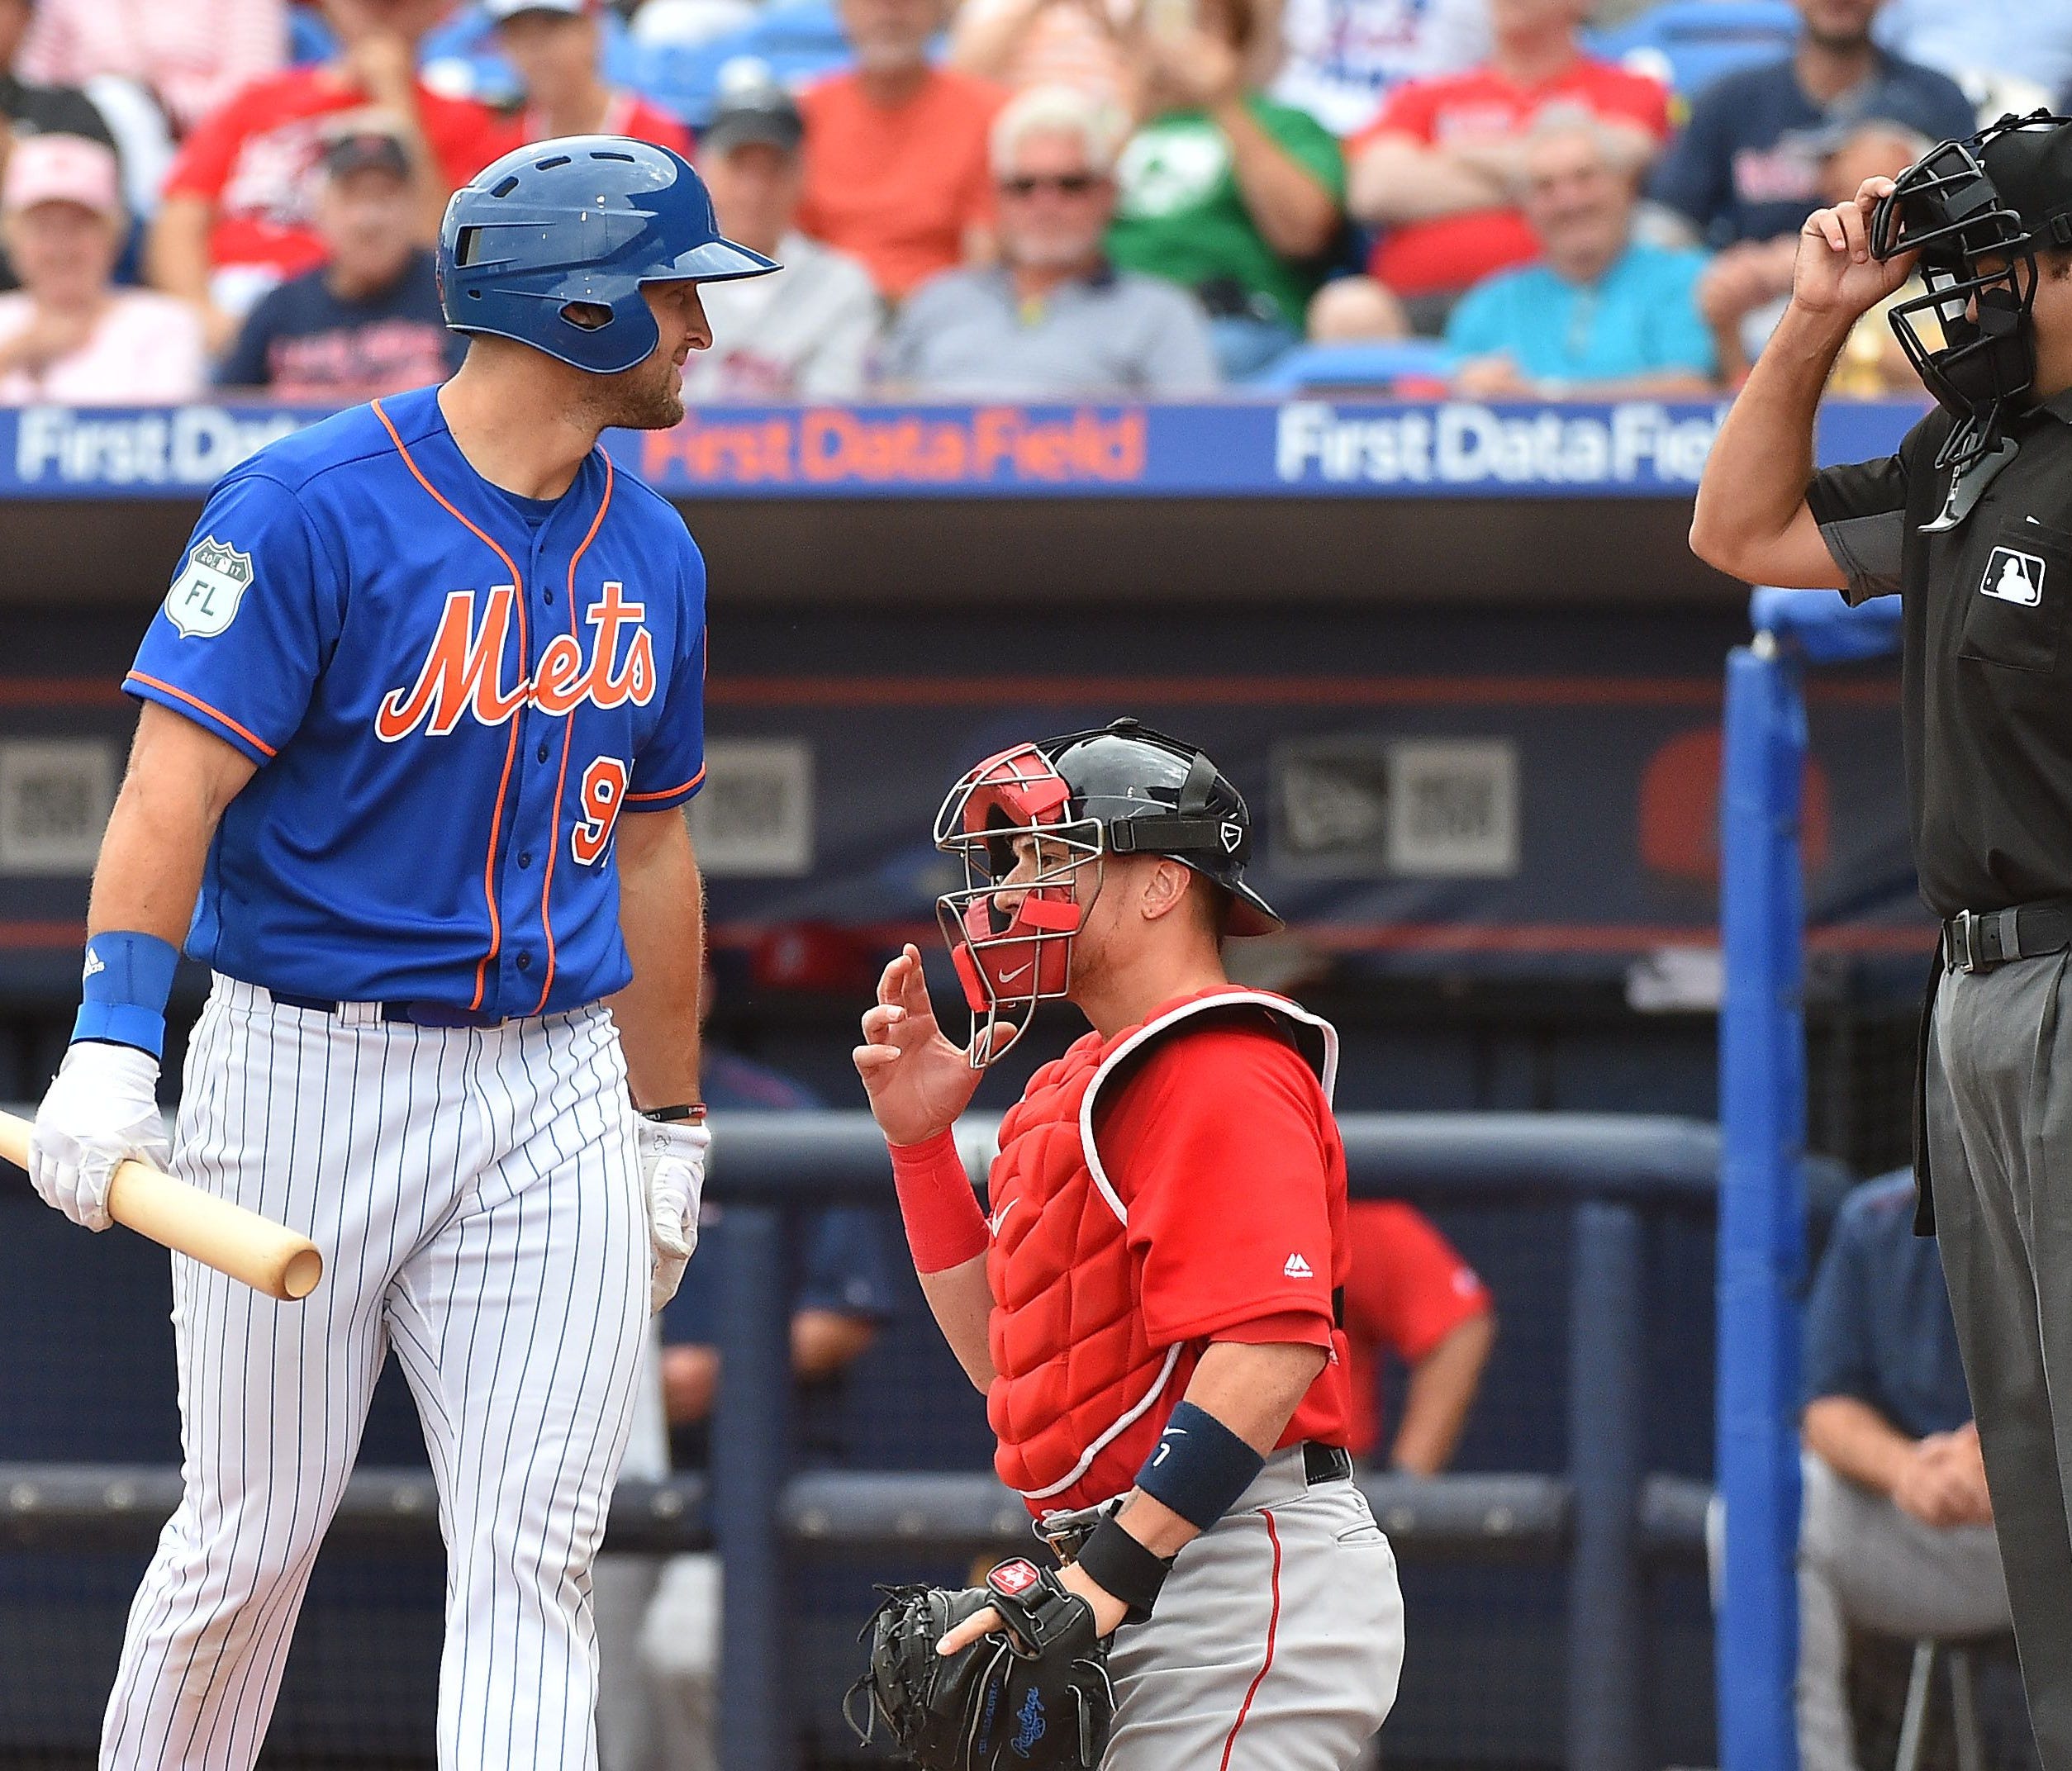 Mets designated hitter Tim Tebow has some words with the home plate umpire after striking out against the Red Sox at First Data Field in Port St. Lucie, Fla.